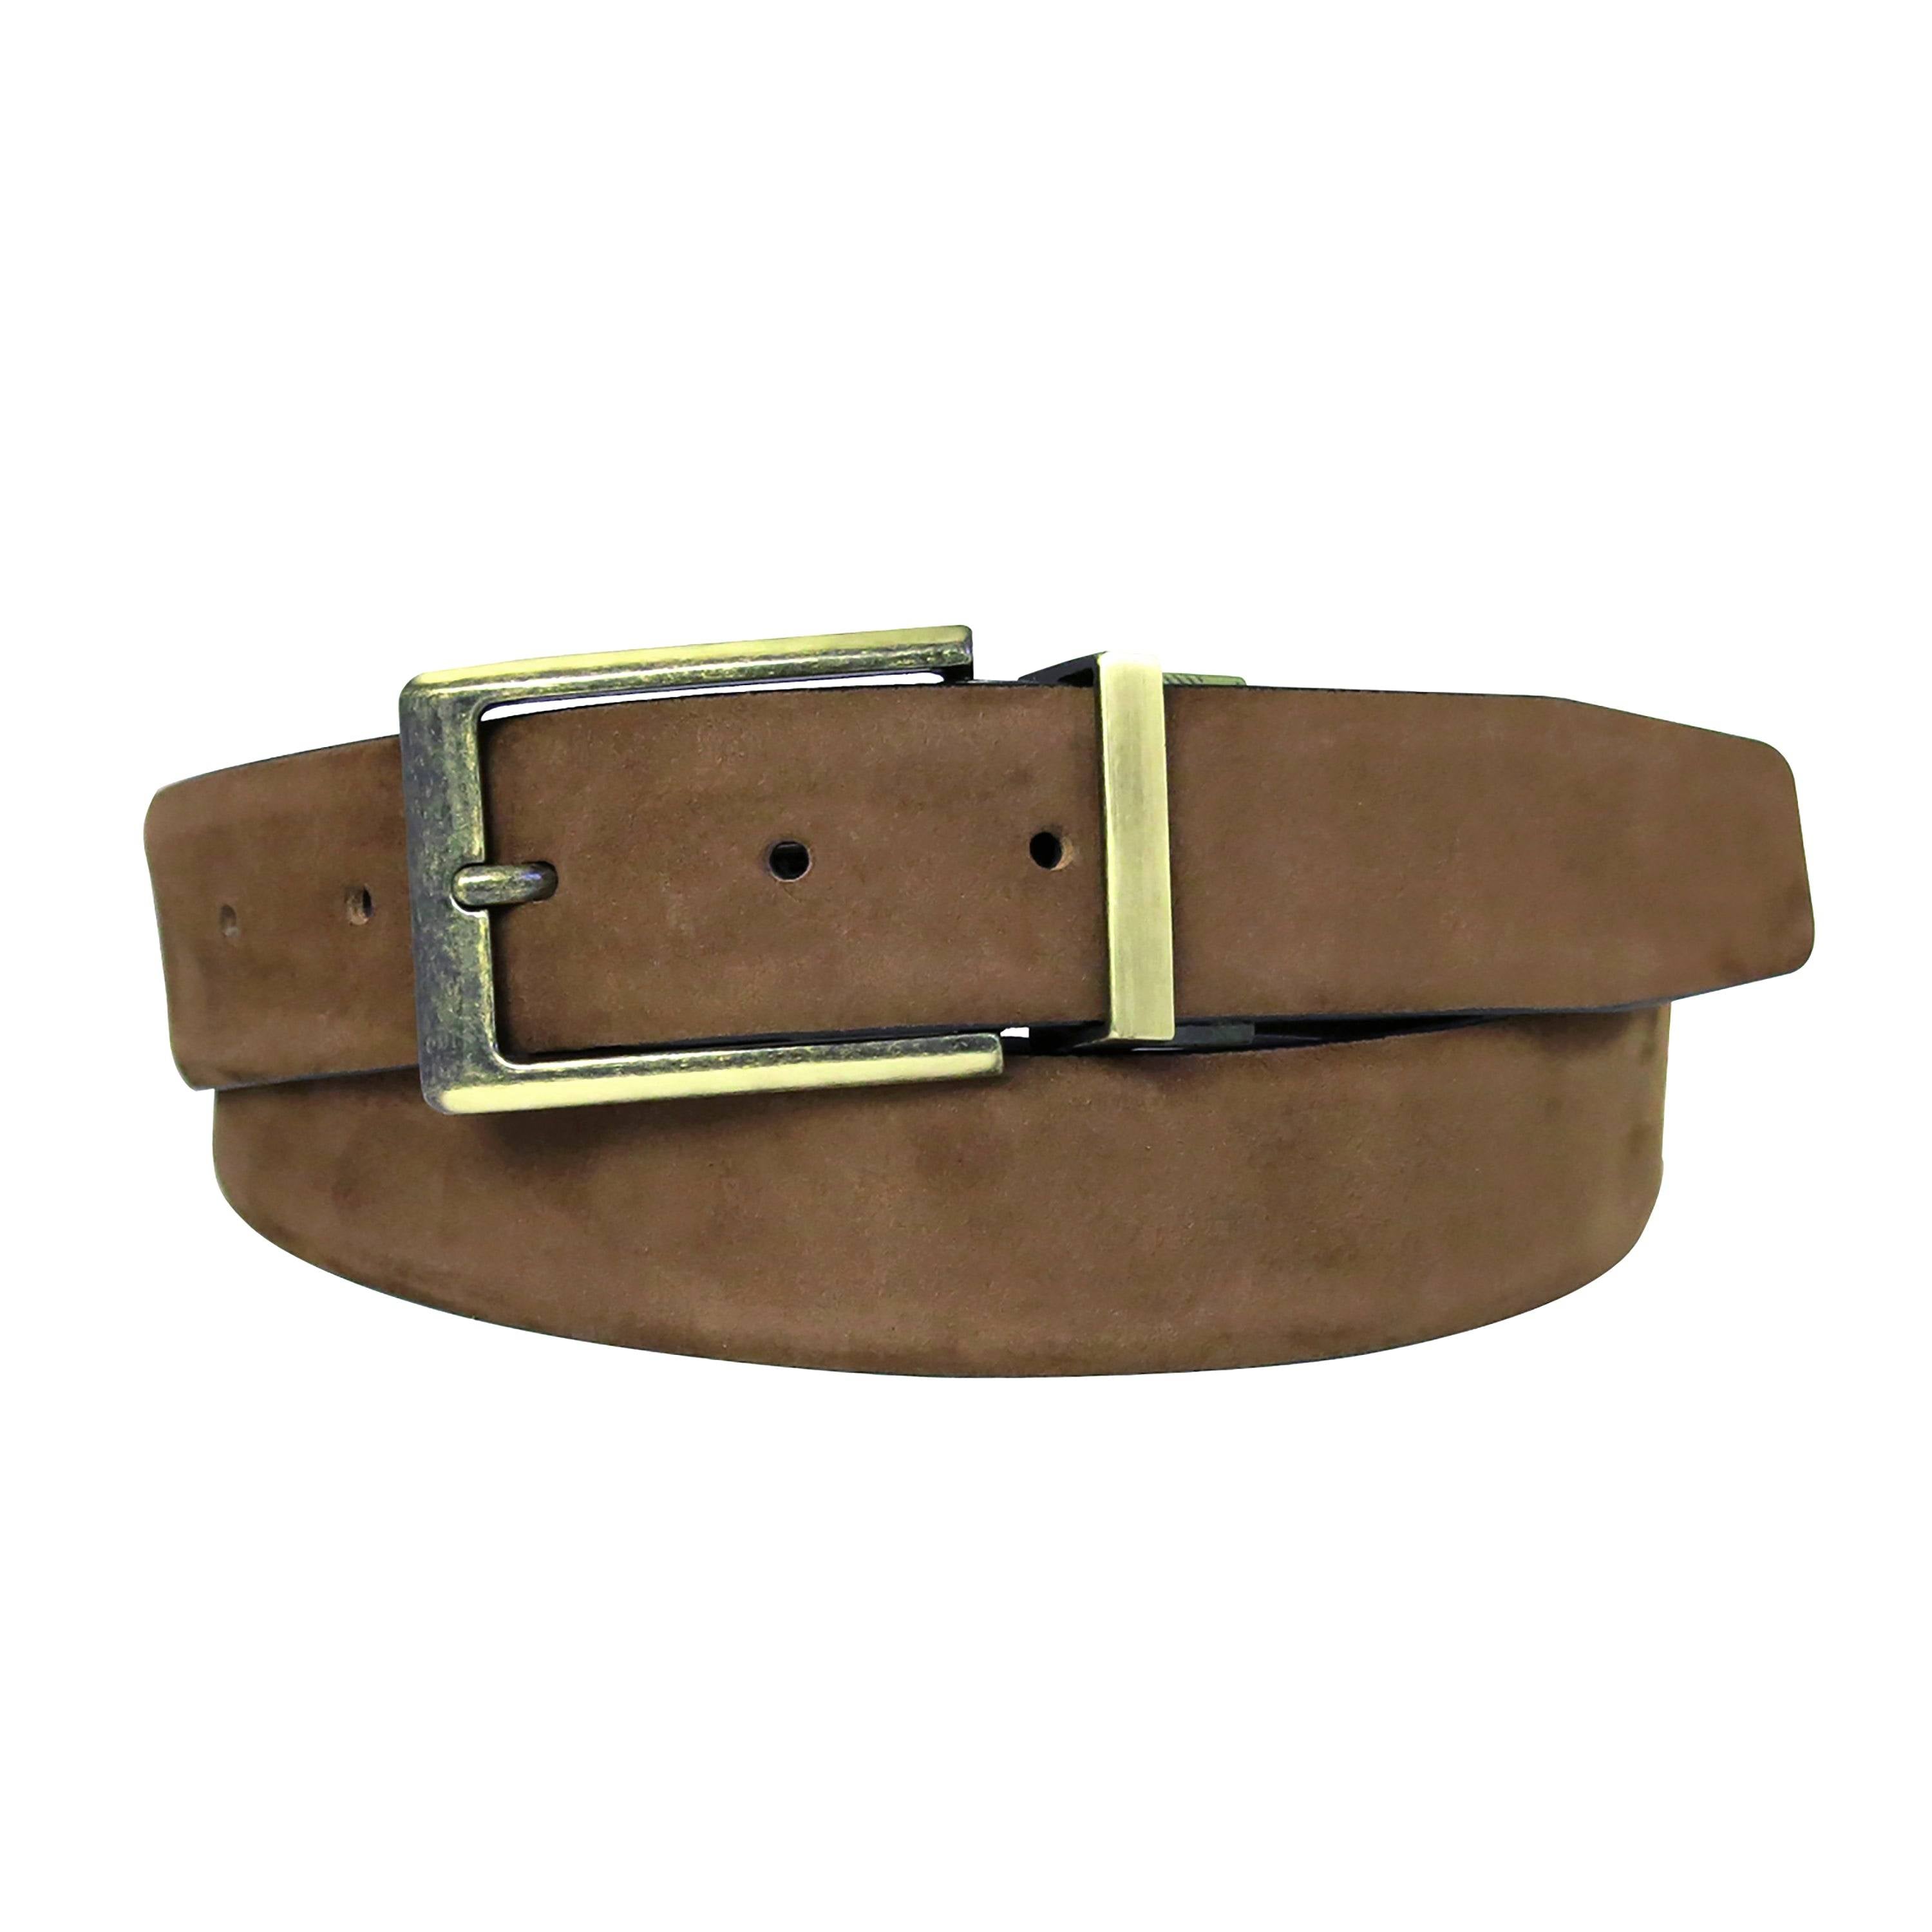 a brown belt with a gold buckle